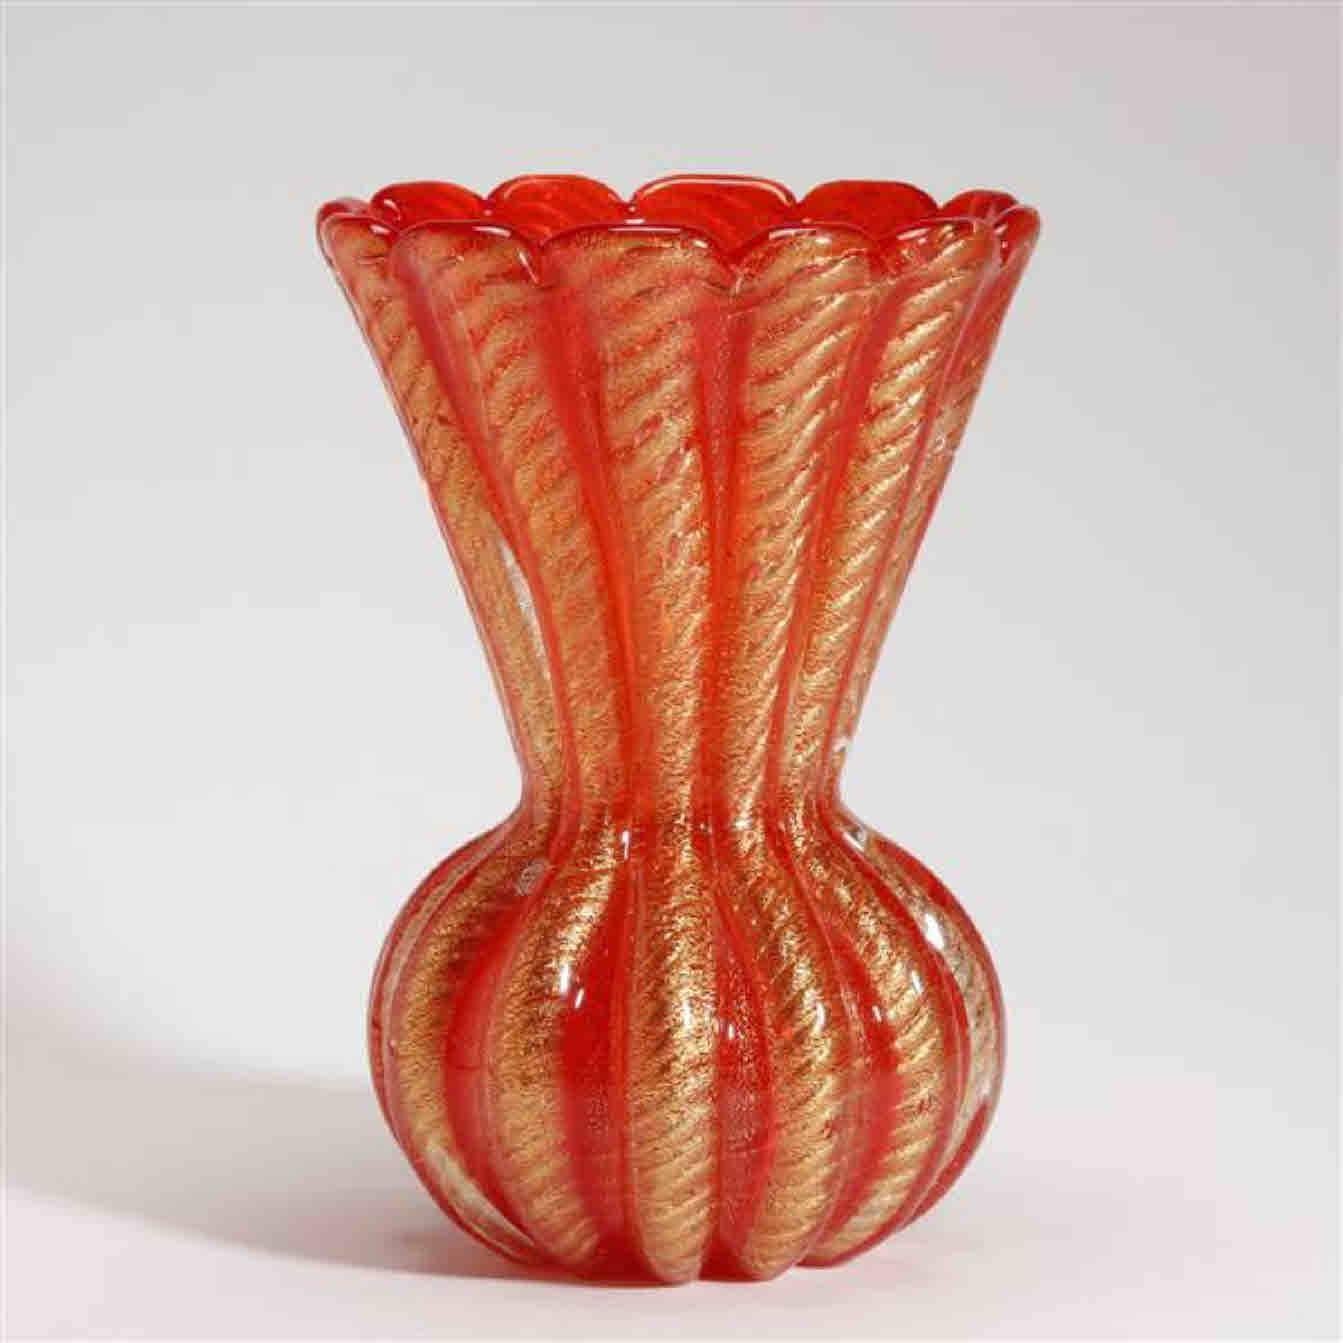 Vibrant red and gold Cordonato d'oro vase by Barovier and Toso.